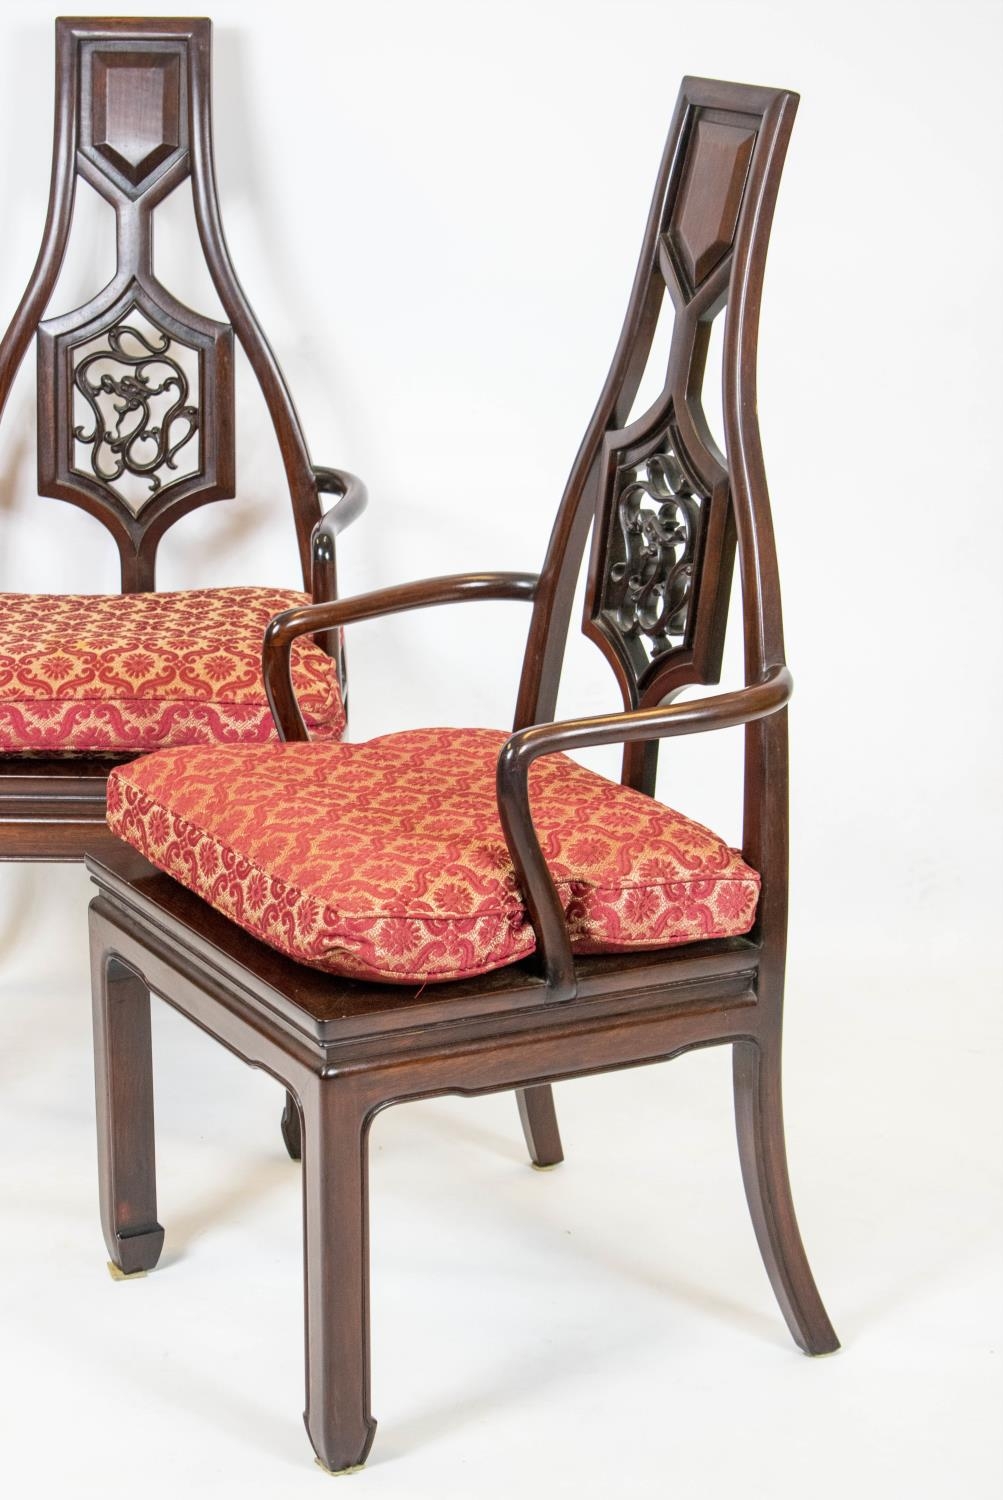 ARMCHAIRS, 109cm H x 51cm W, a pair, Chinese rosewood with red squab cushions. (2) - Image 2 of 5